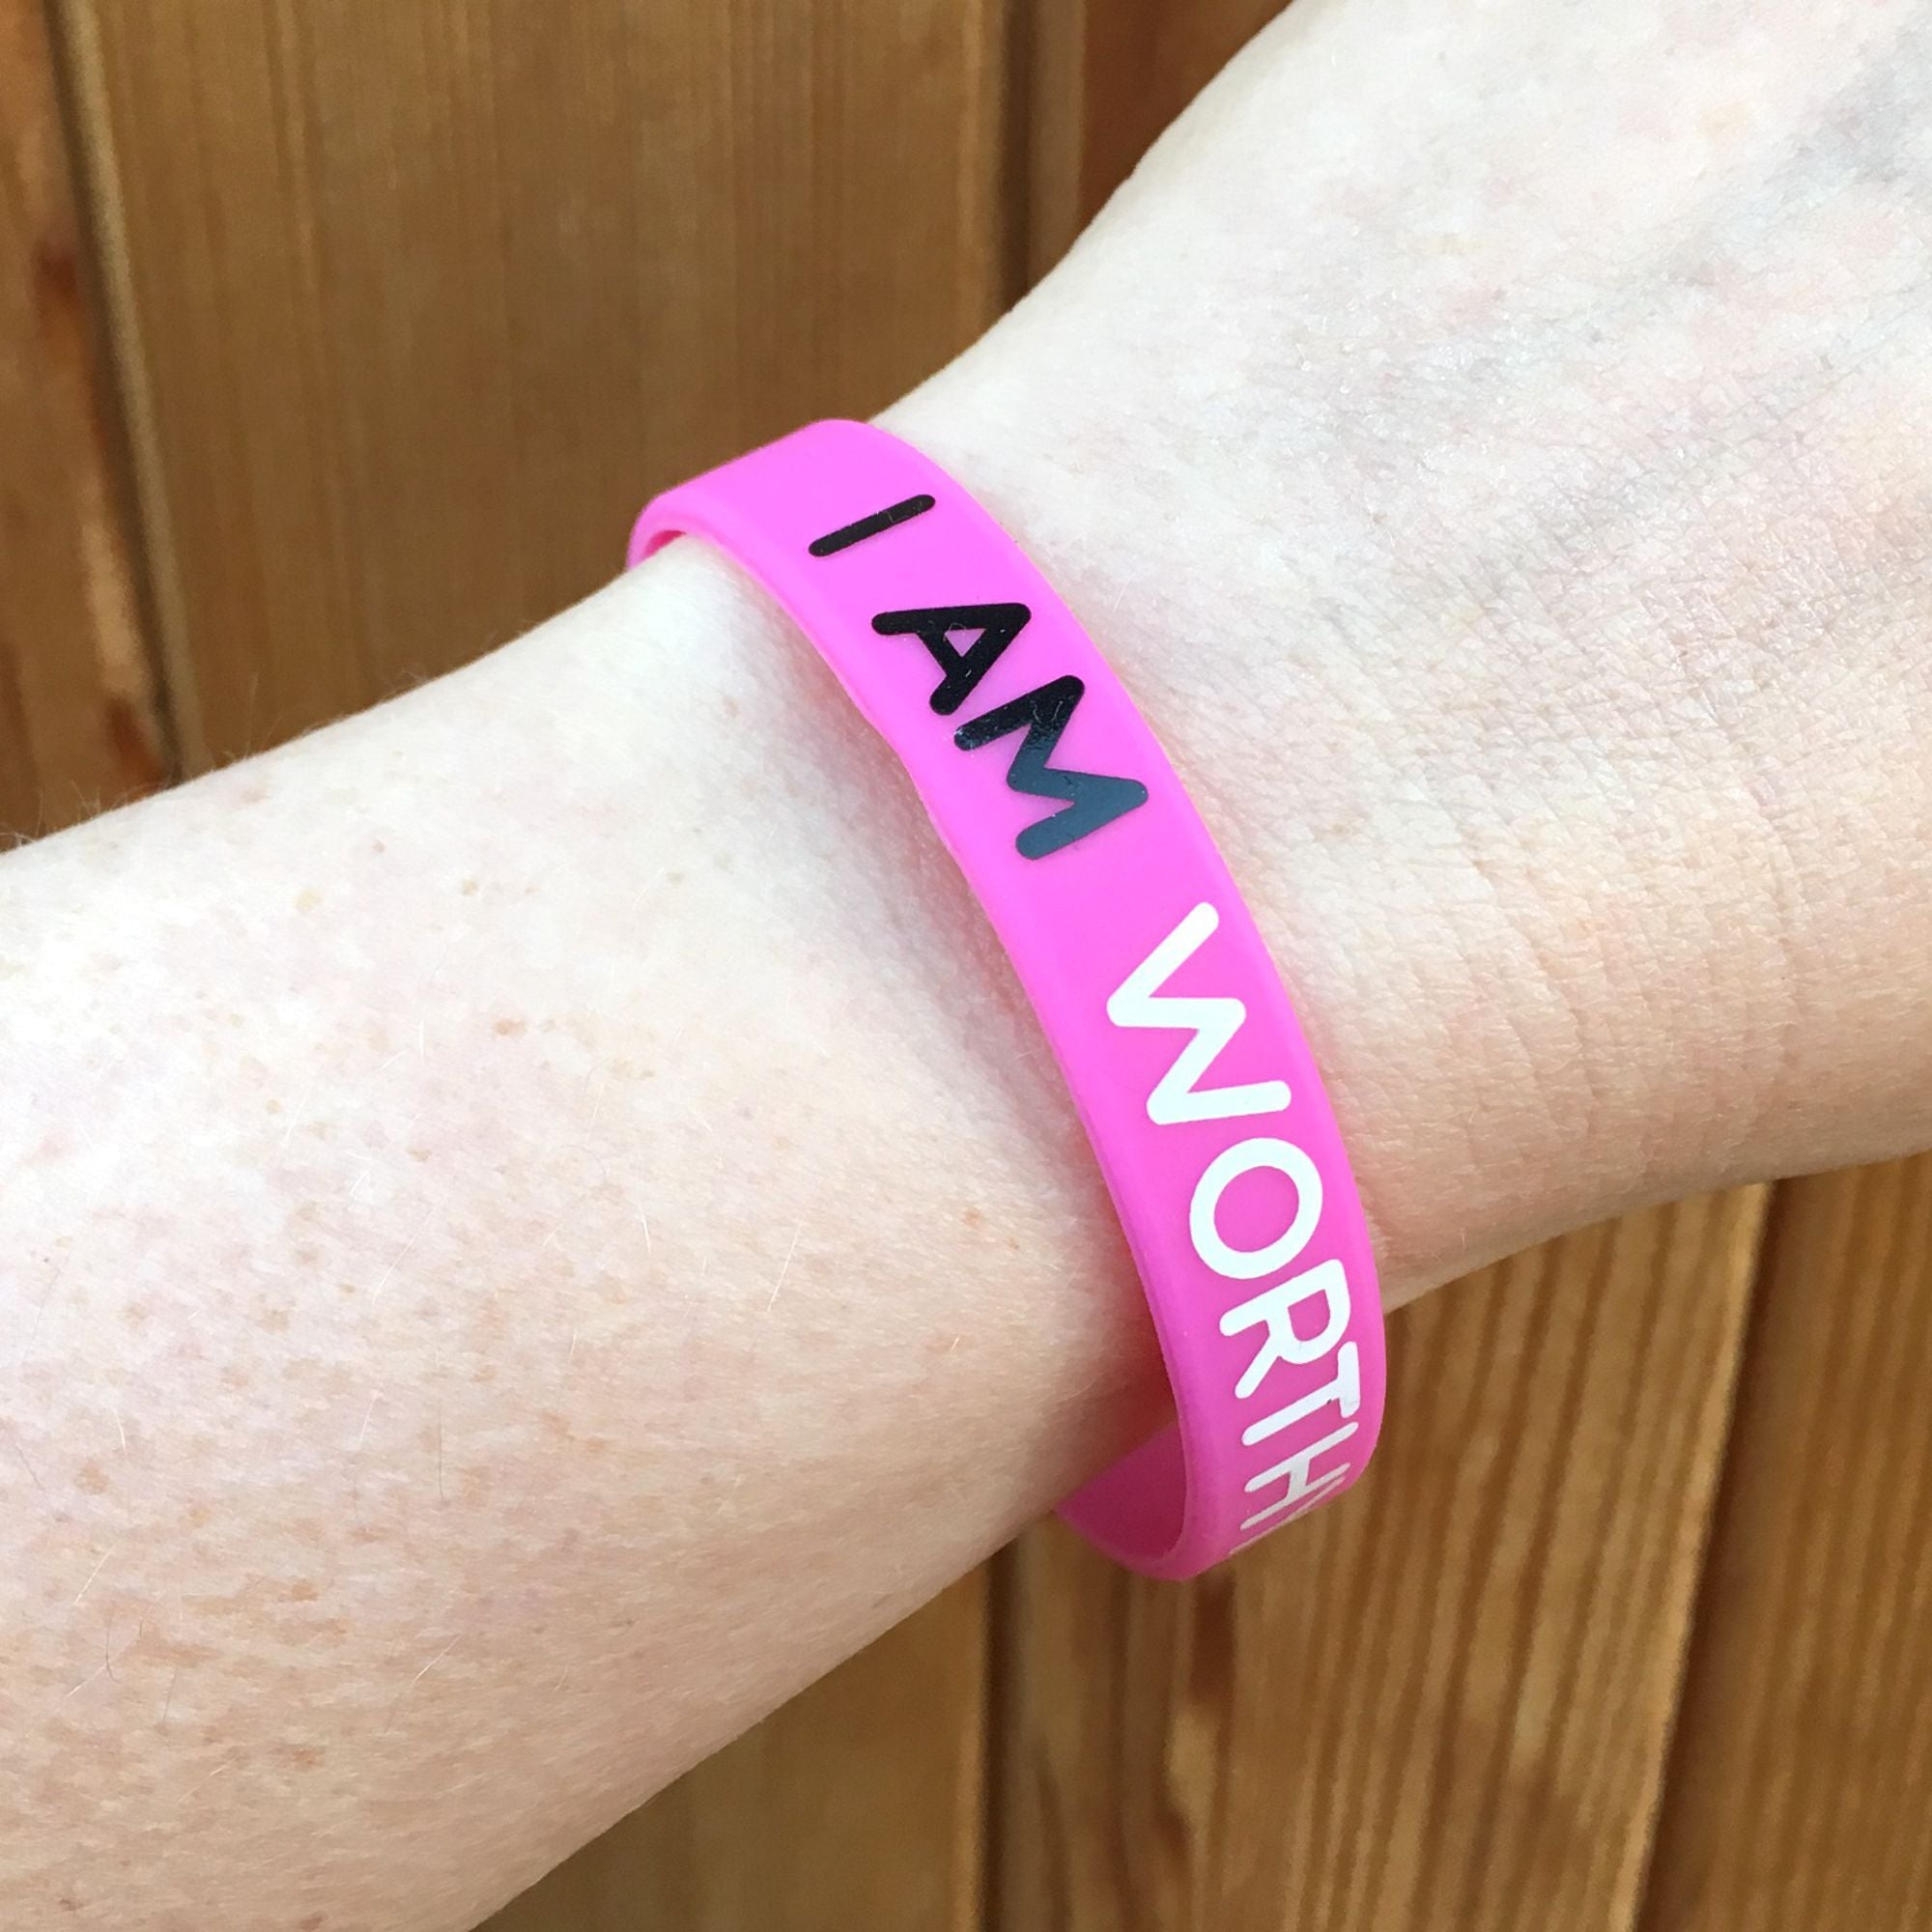 affirmation wristbands worthy positive